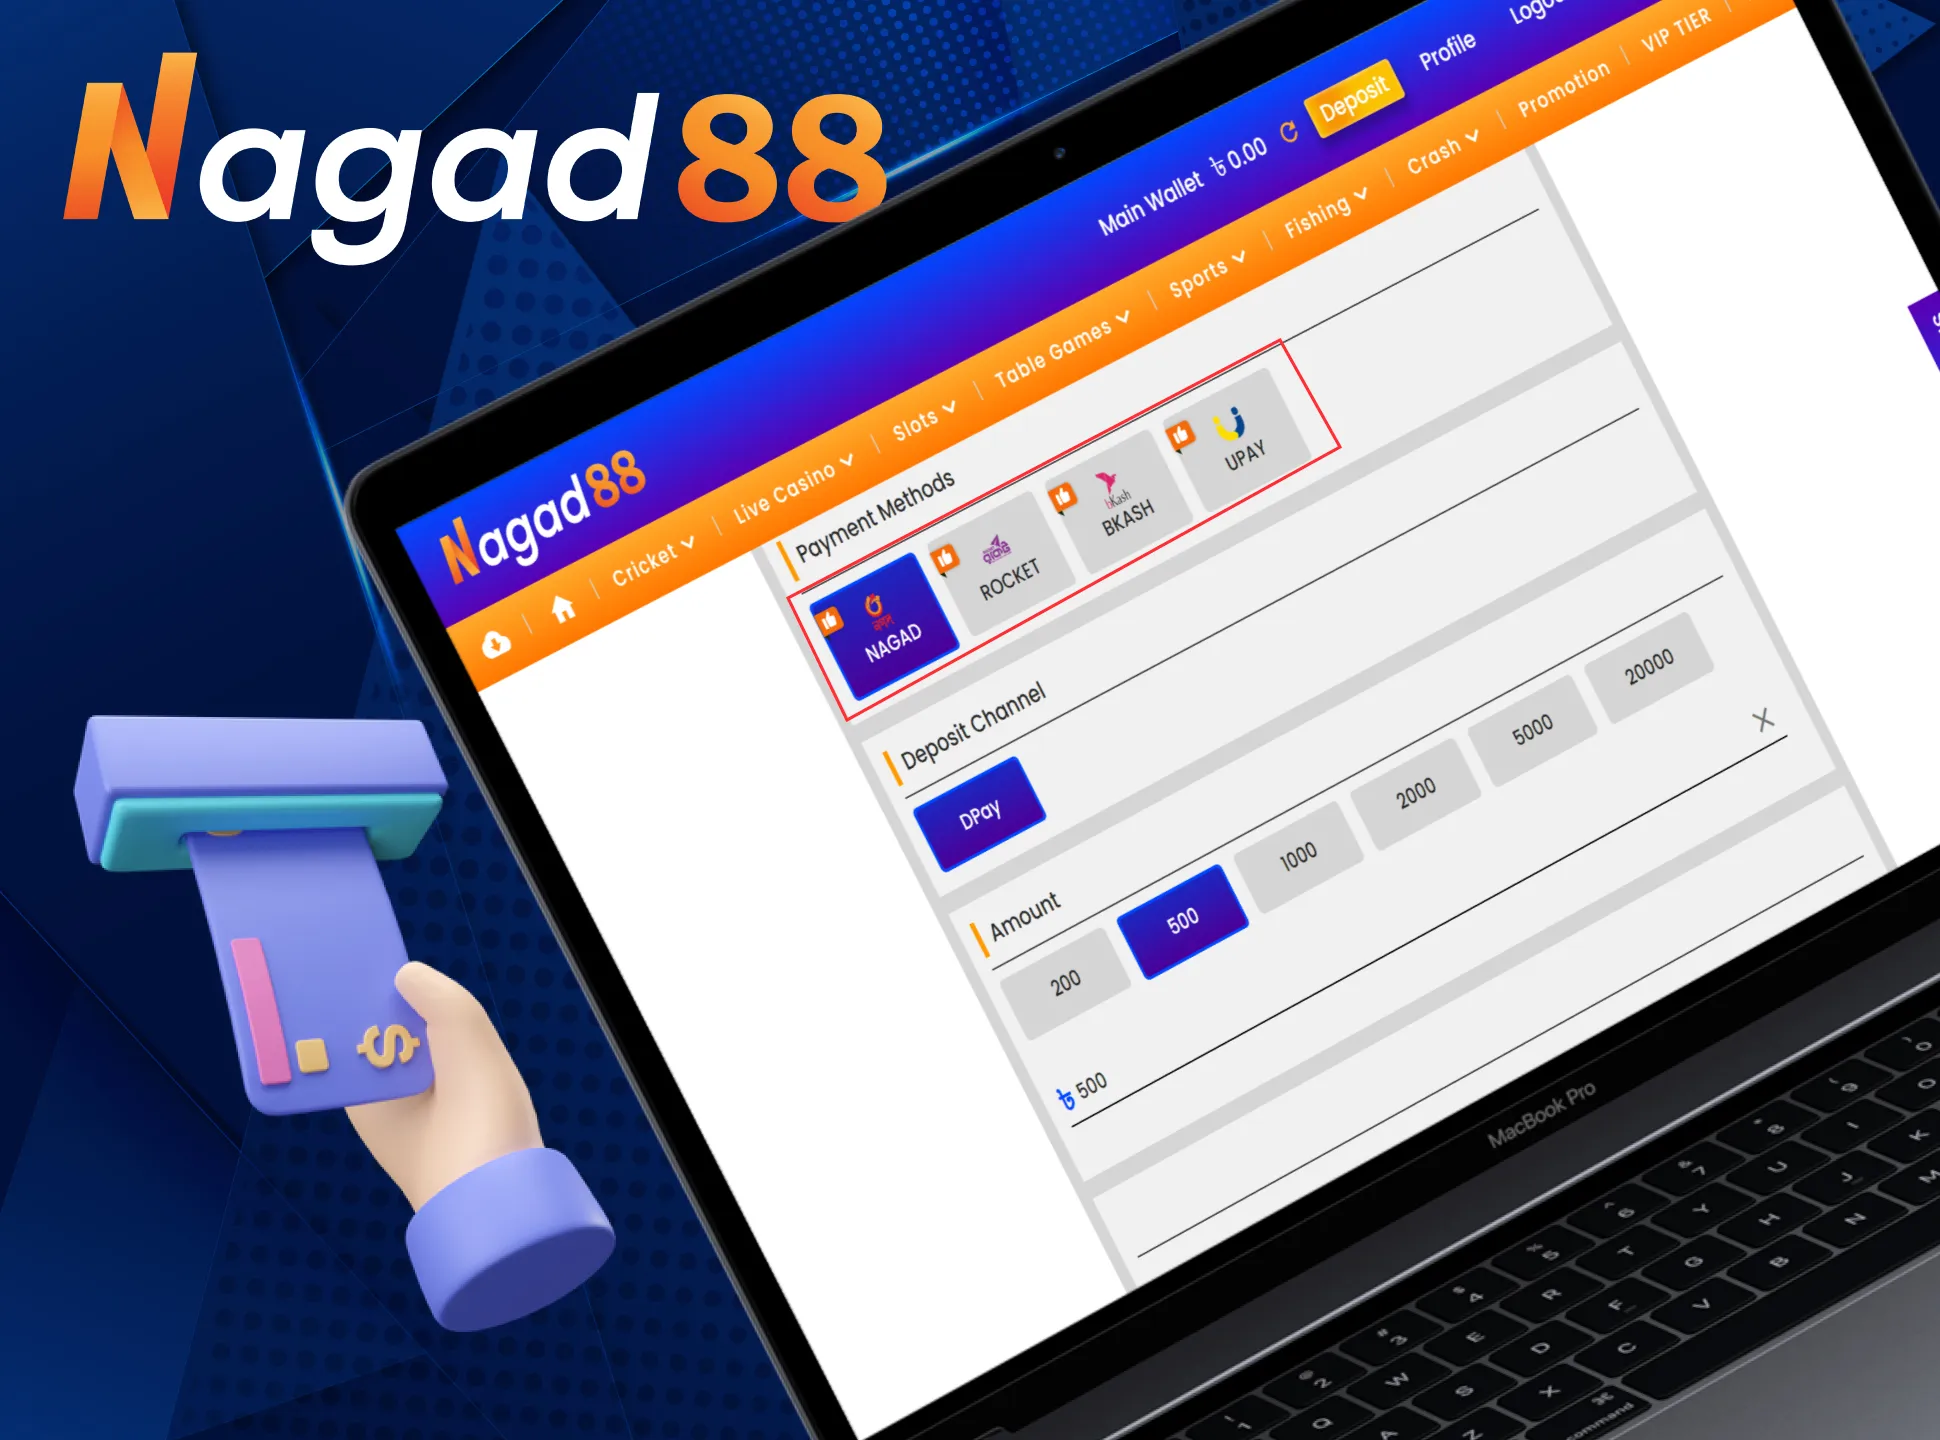 Get to know Nagad88 payment systems.